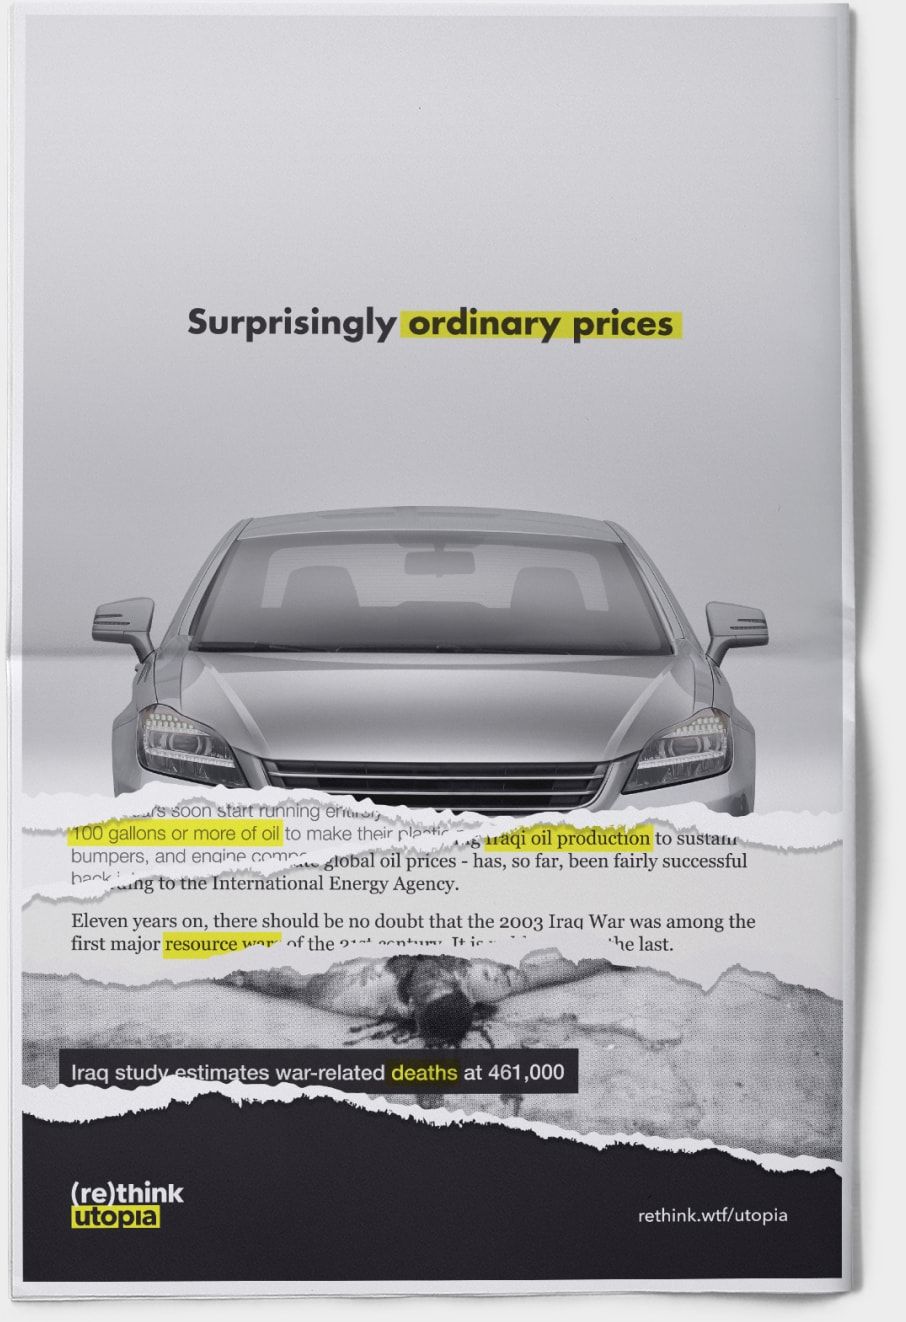 Print mockup of car ad, torn to reveal layers of information about true cost.